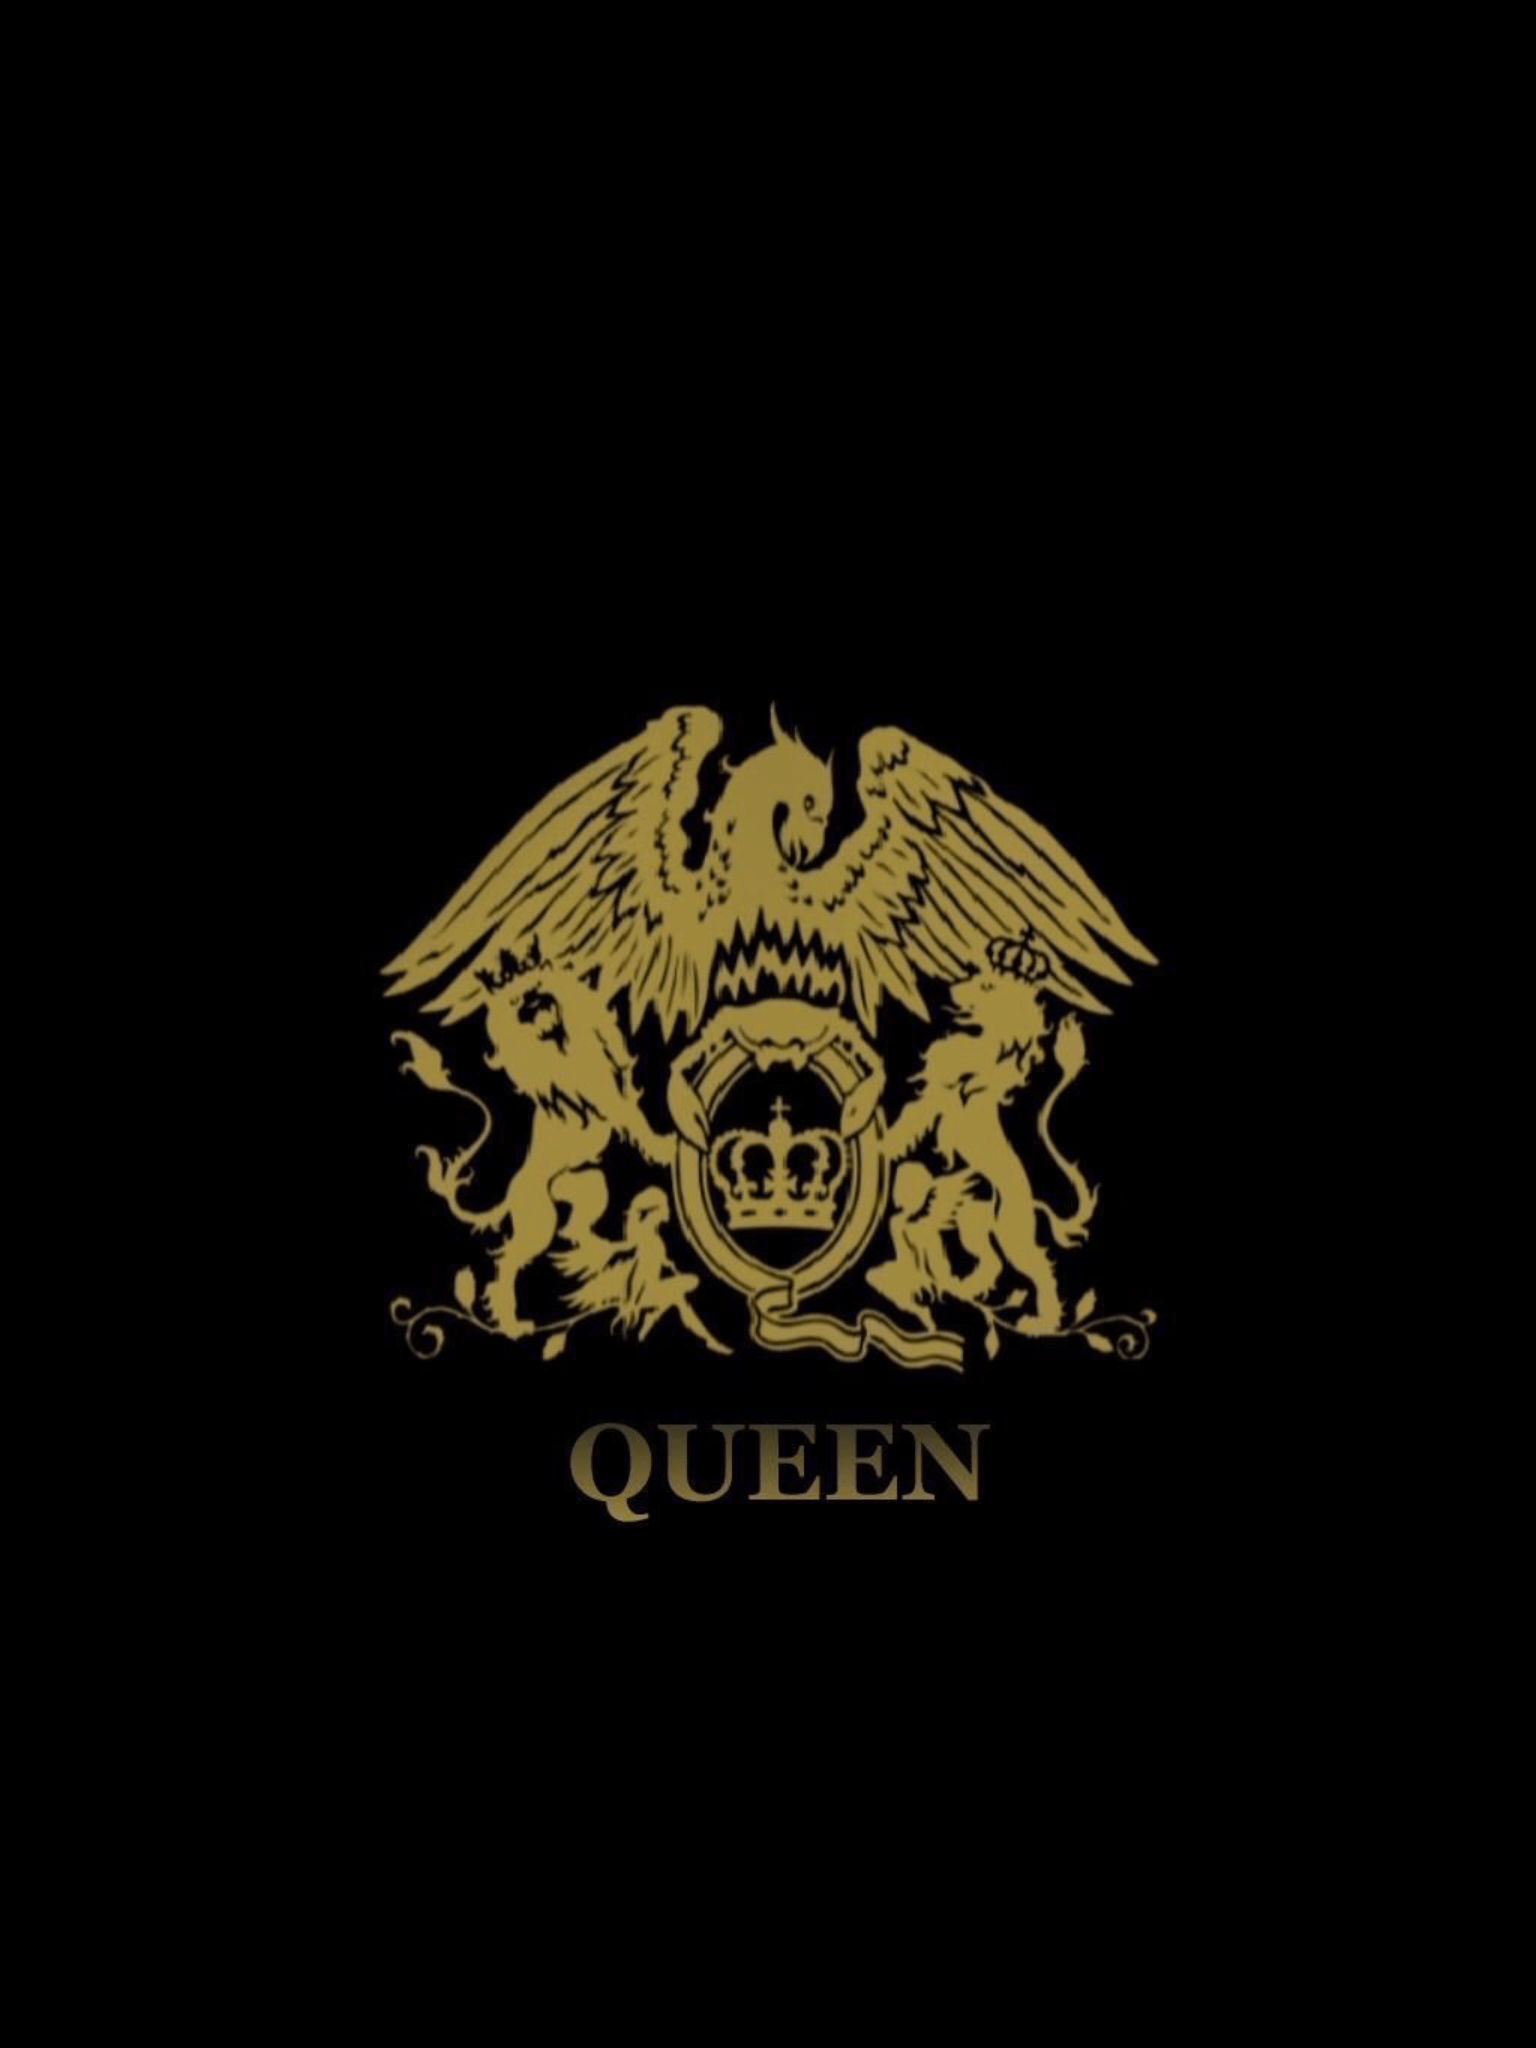 All of the signs of the guys in the band are in here. Queen in 2019